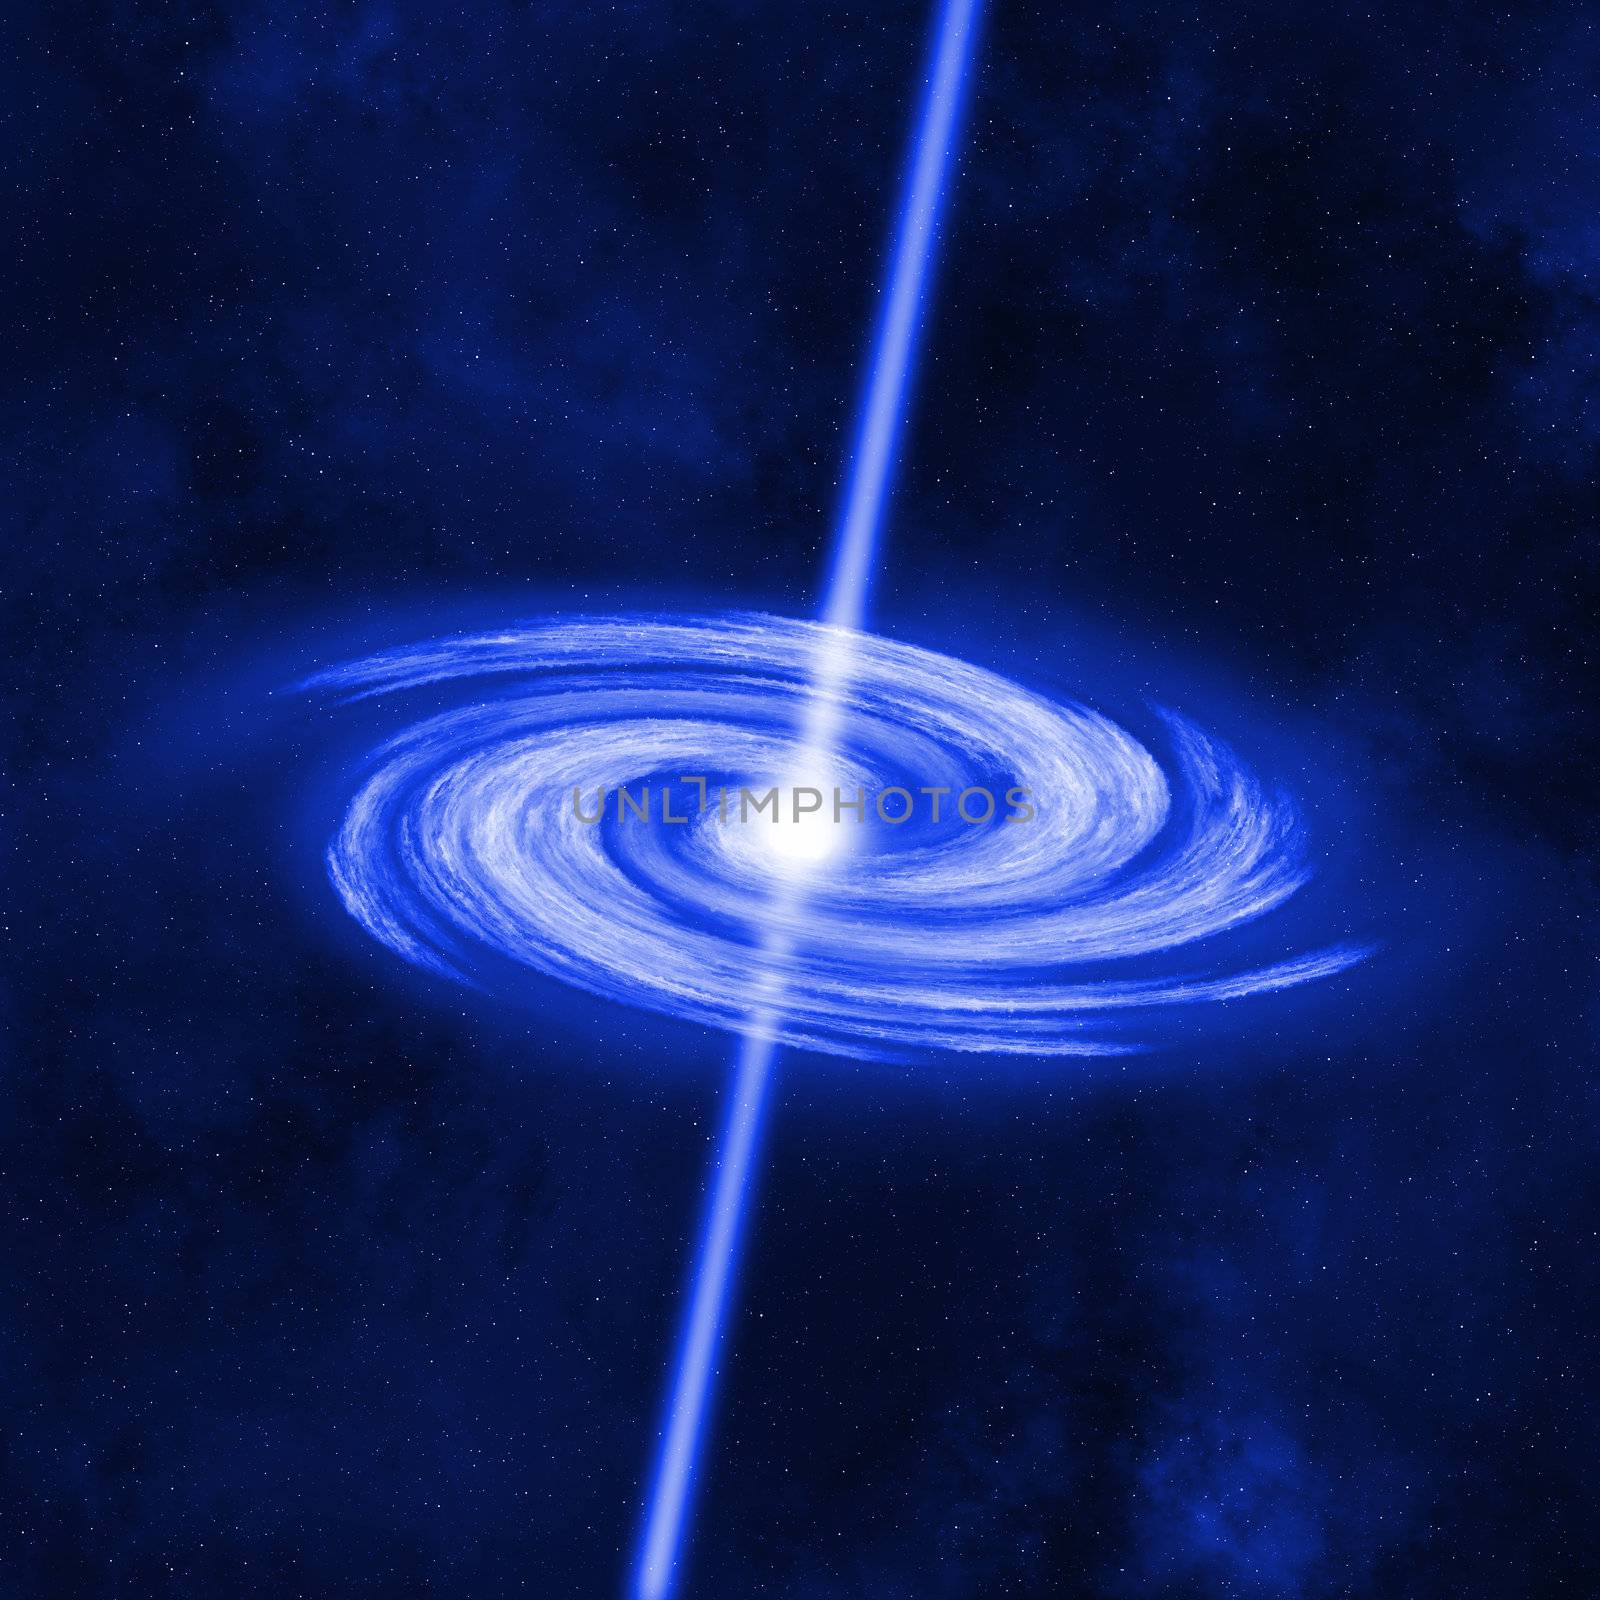 Black Hole Absorbs Remnants of a Matter Star, Nebula background